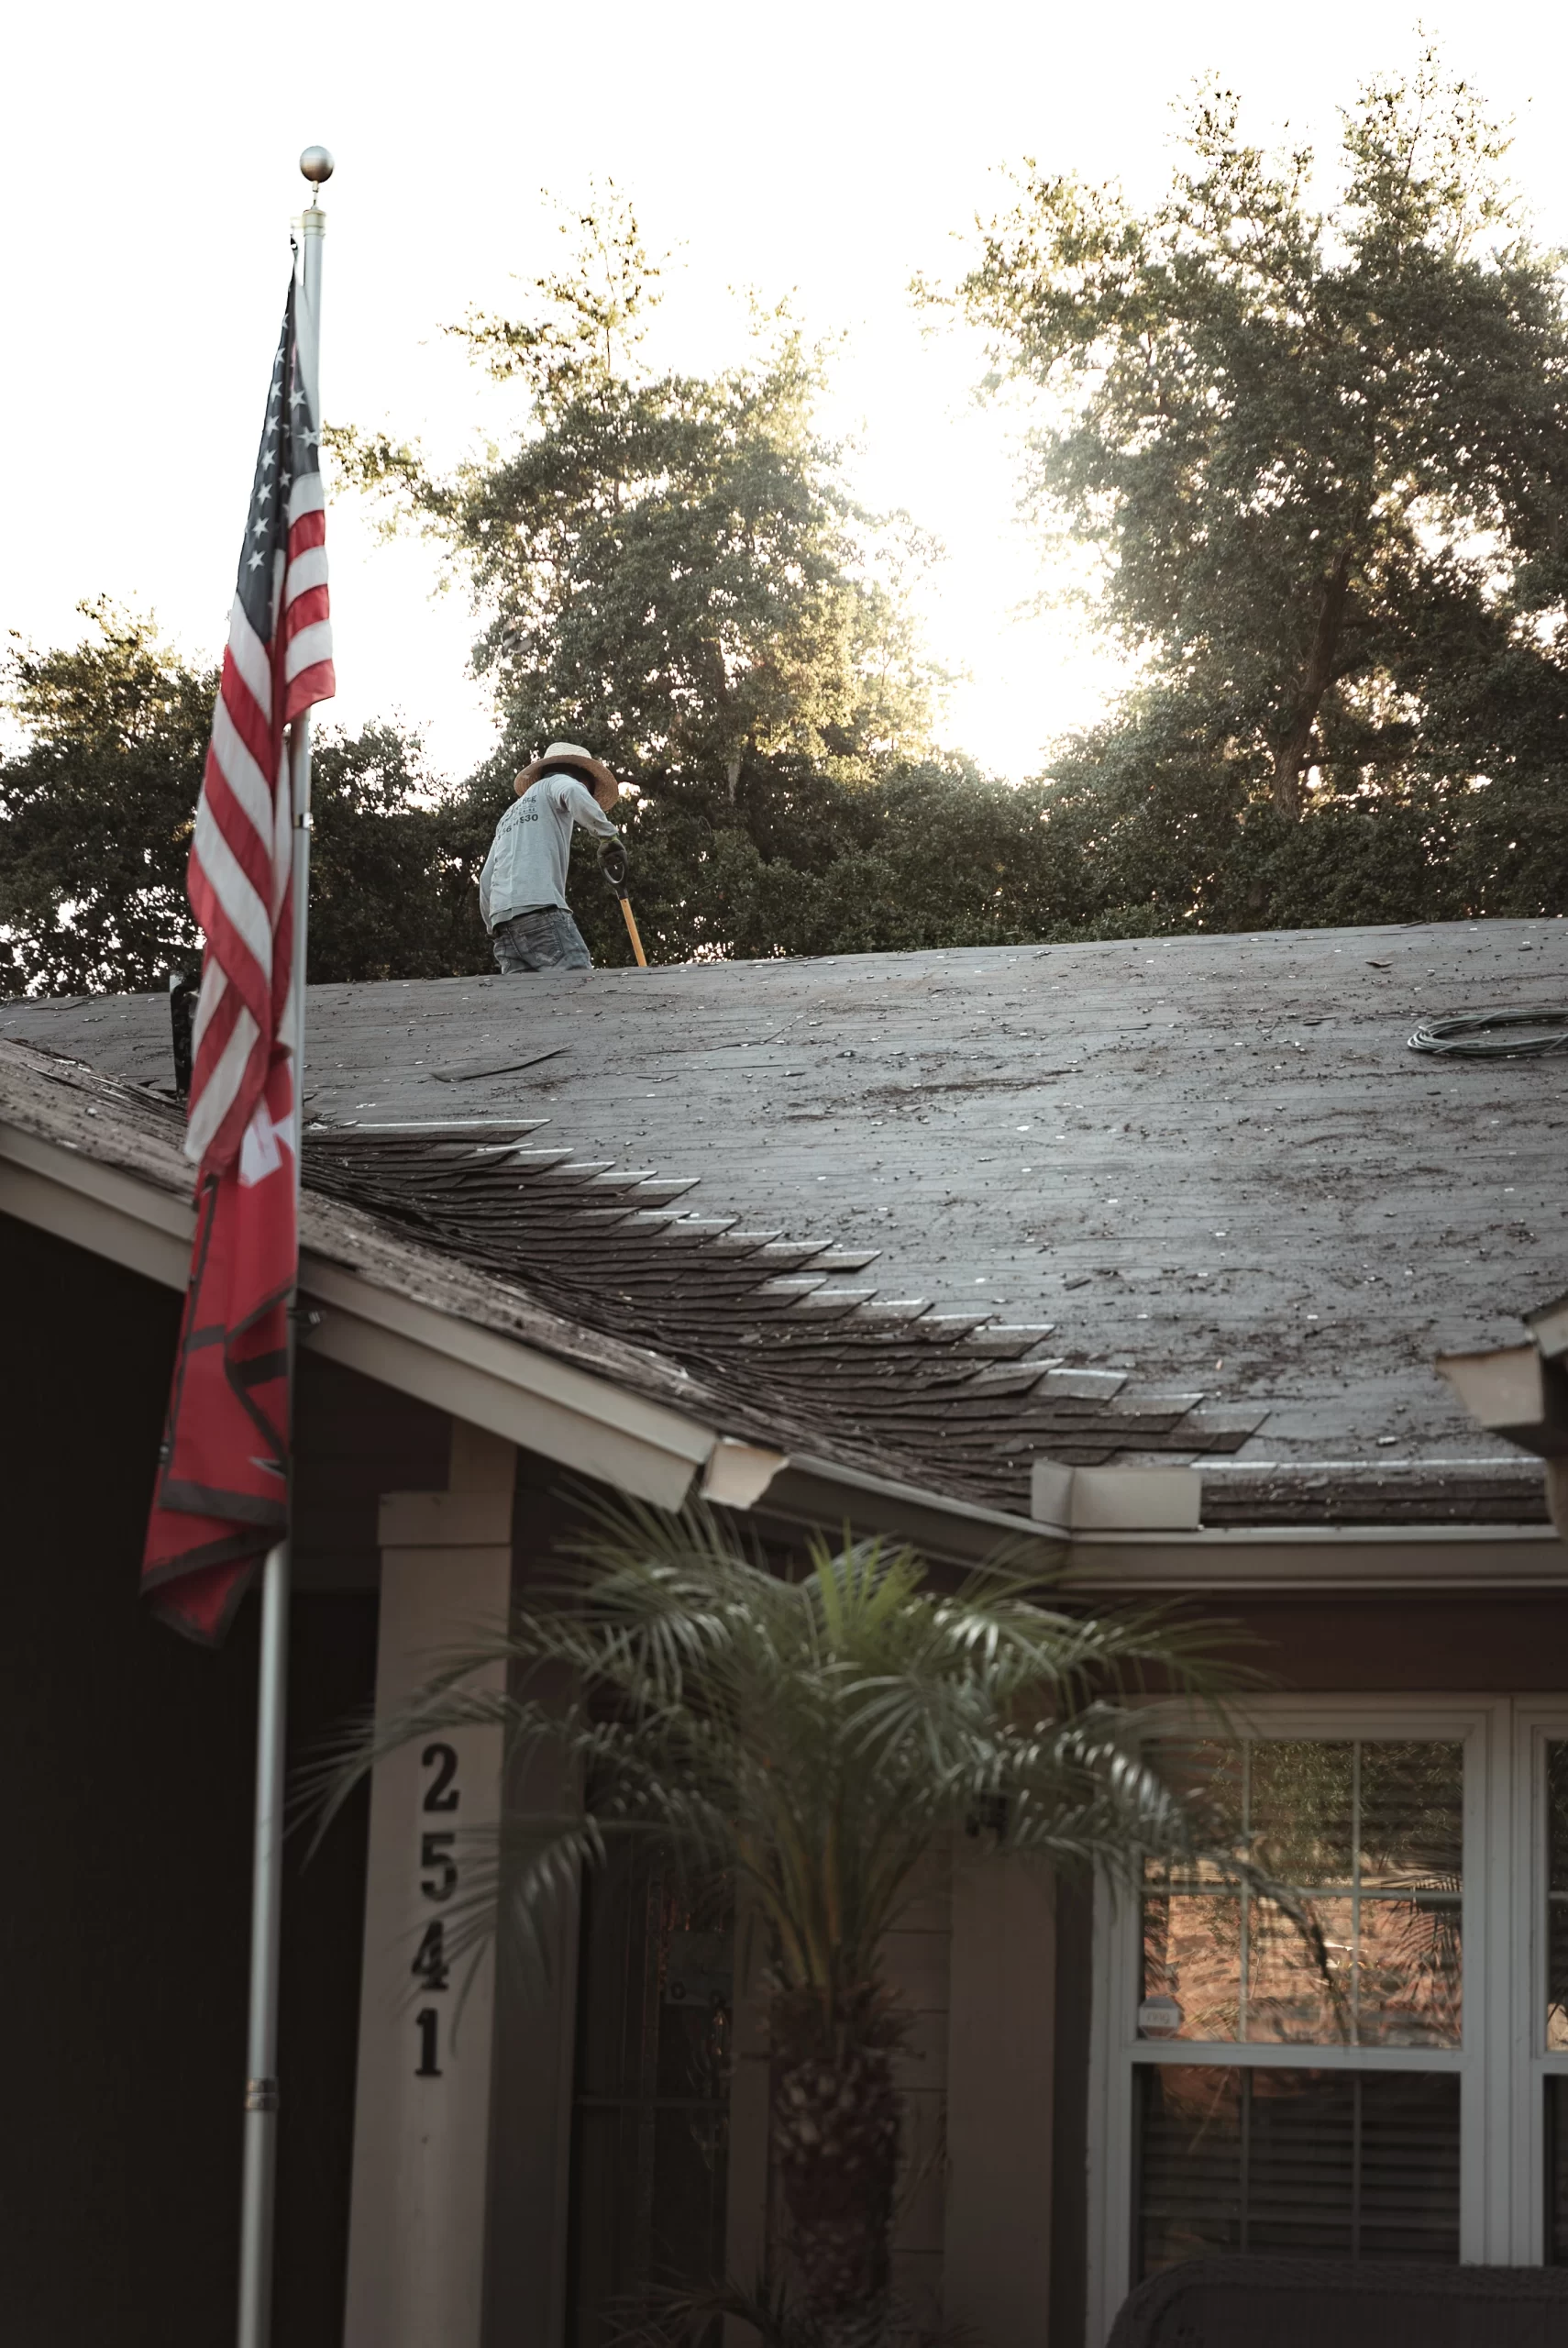 CB Roofing Roofing Contractor on a residential home performing a tear off before installing a new asphalt shingle roof.